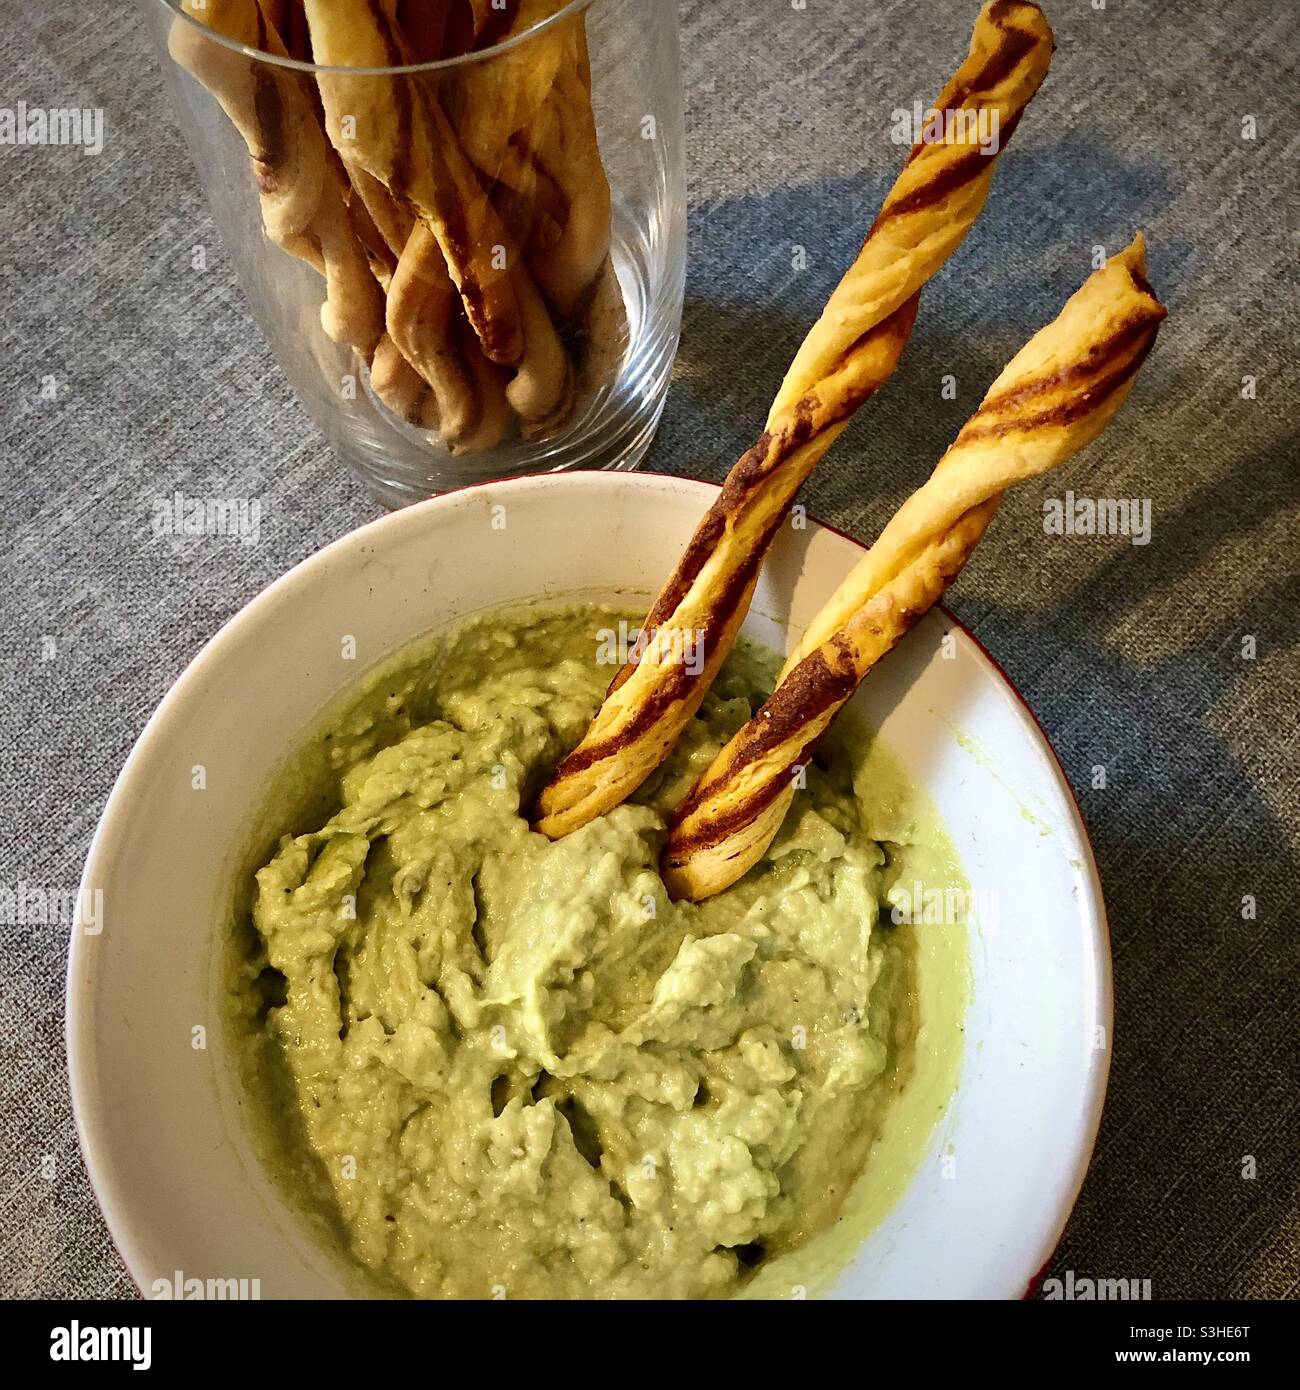 Homemade avocado dip in bowl with commercial breadsticks. Stock Photo